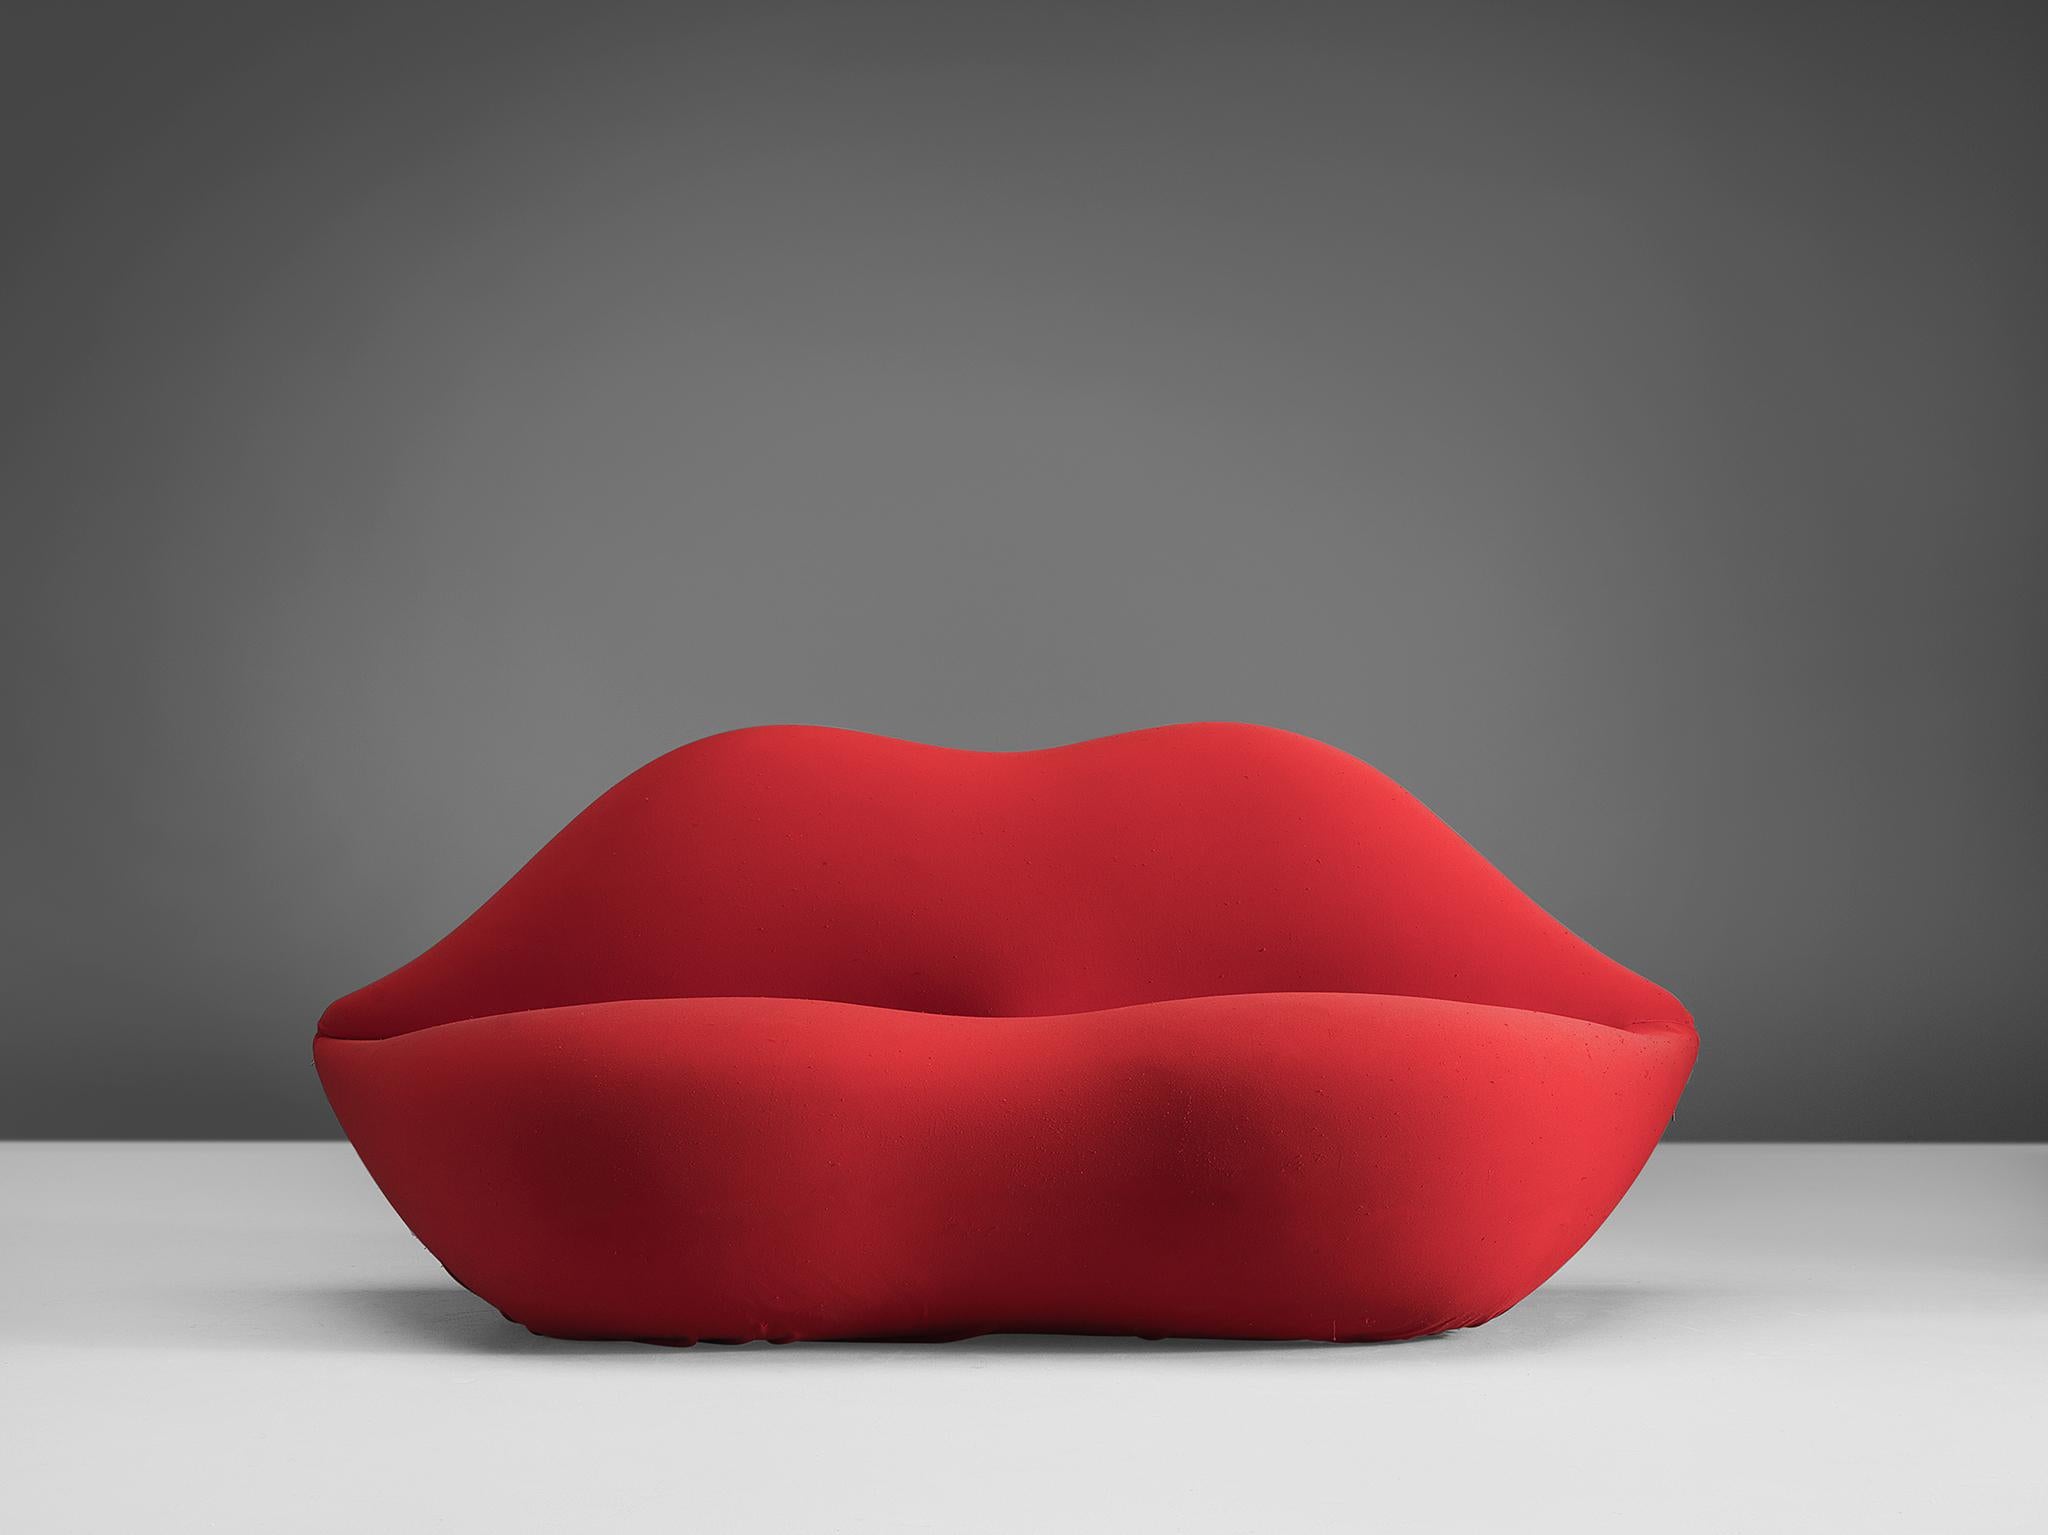 Sofa, fabric, metal frame, foam by Studio65, Italy, 1972 design, execution, 1999.

This settee is executed in fabric and is large enough to sit two people. The Studio 65 Bocca Lip Sofa by Gufram is an icon of postmodern furniture design. Studio65